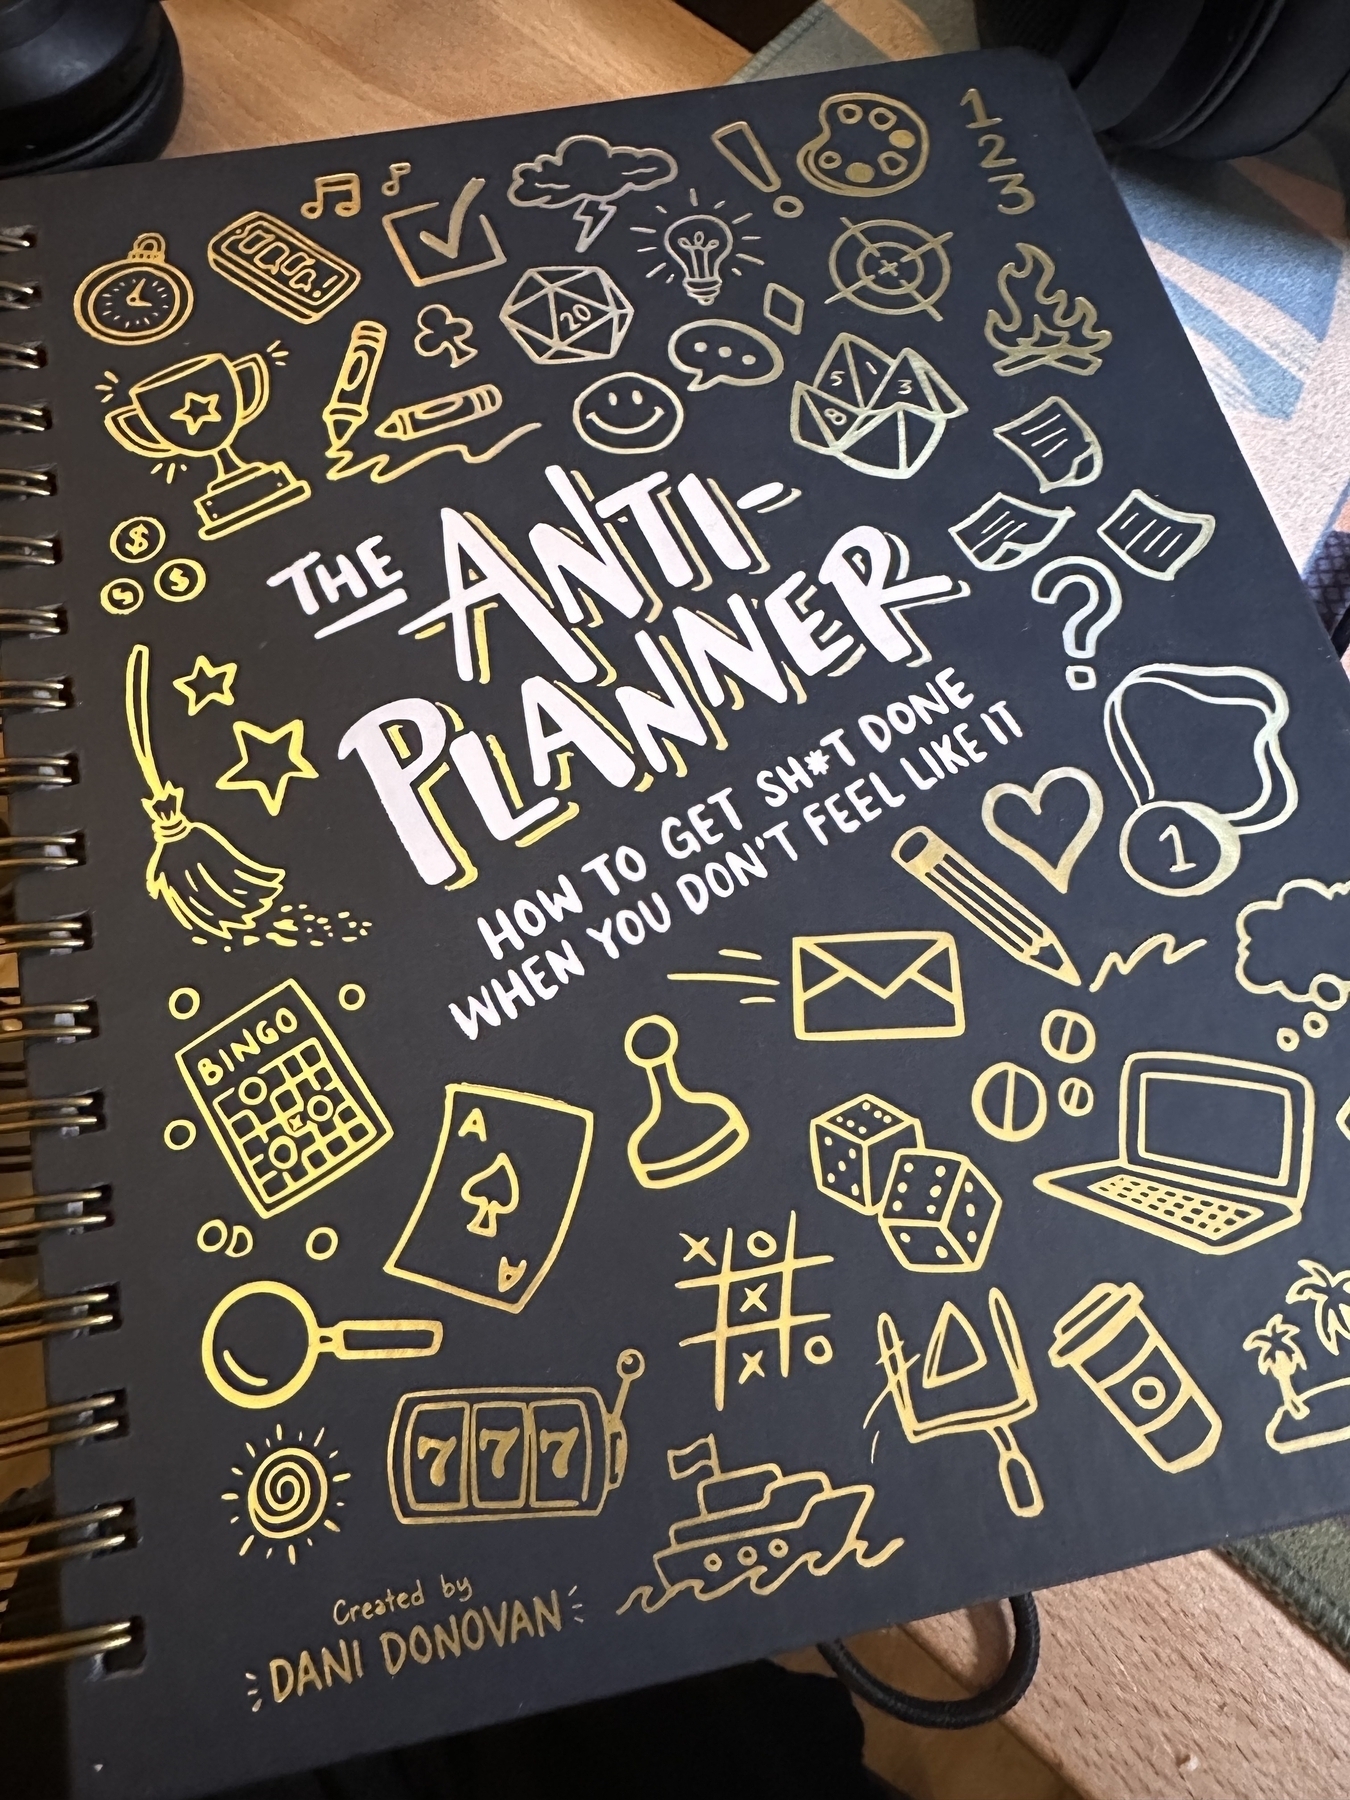 The cover of The Anti-Planner: How to Get Shit Done When You Don’t Feel Like It by Dani Donovan. It is a spiral bound book with navy background and hand drawn sketches of various doodles done in gold foil.